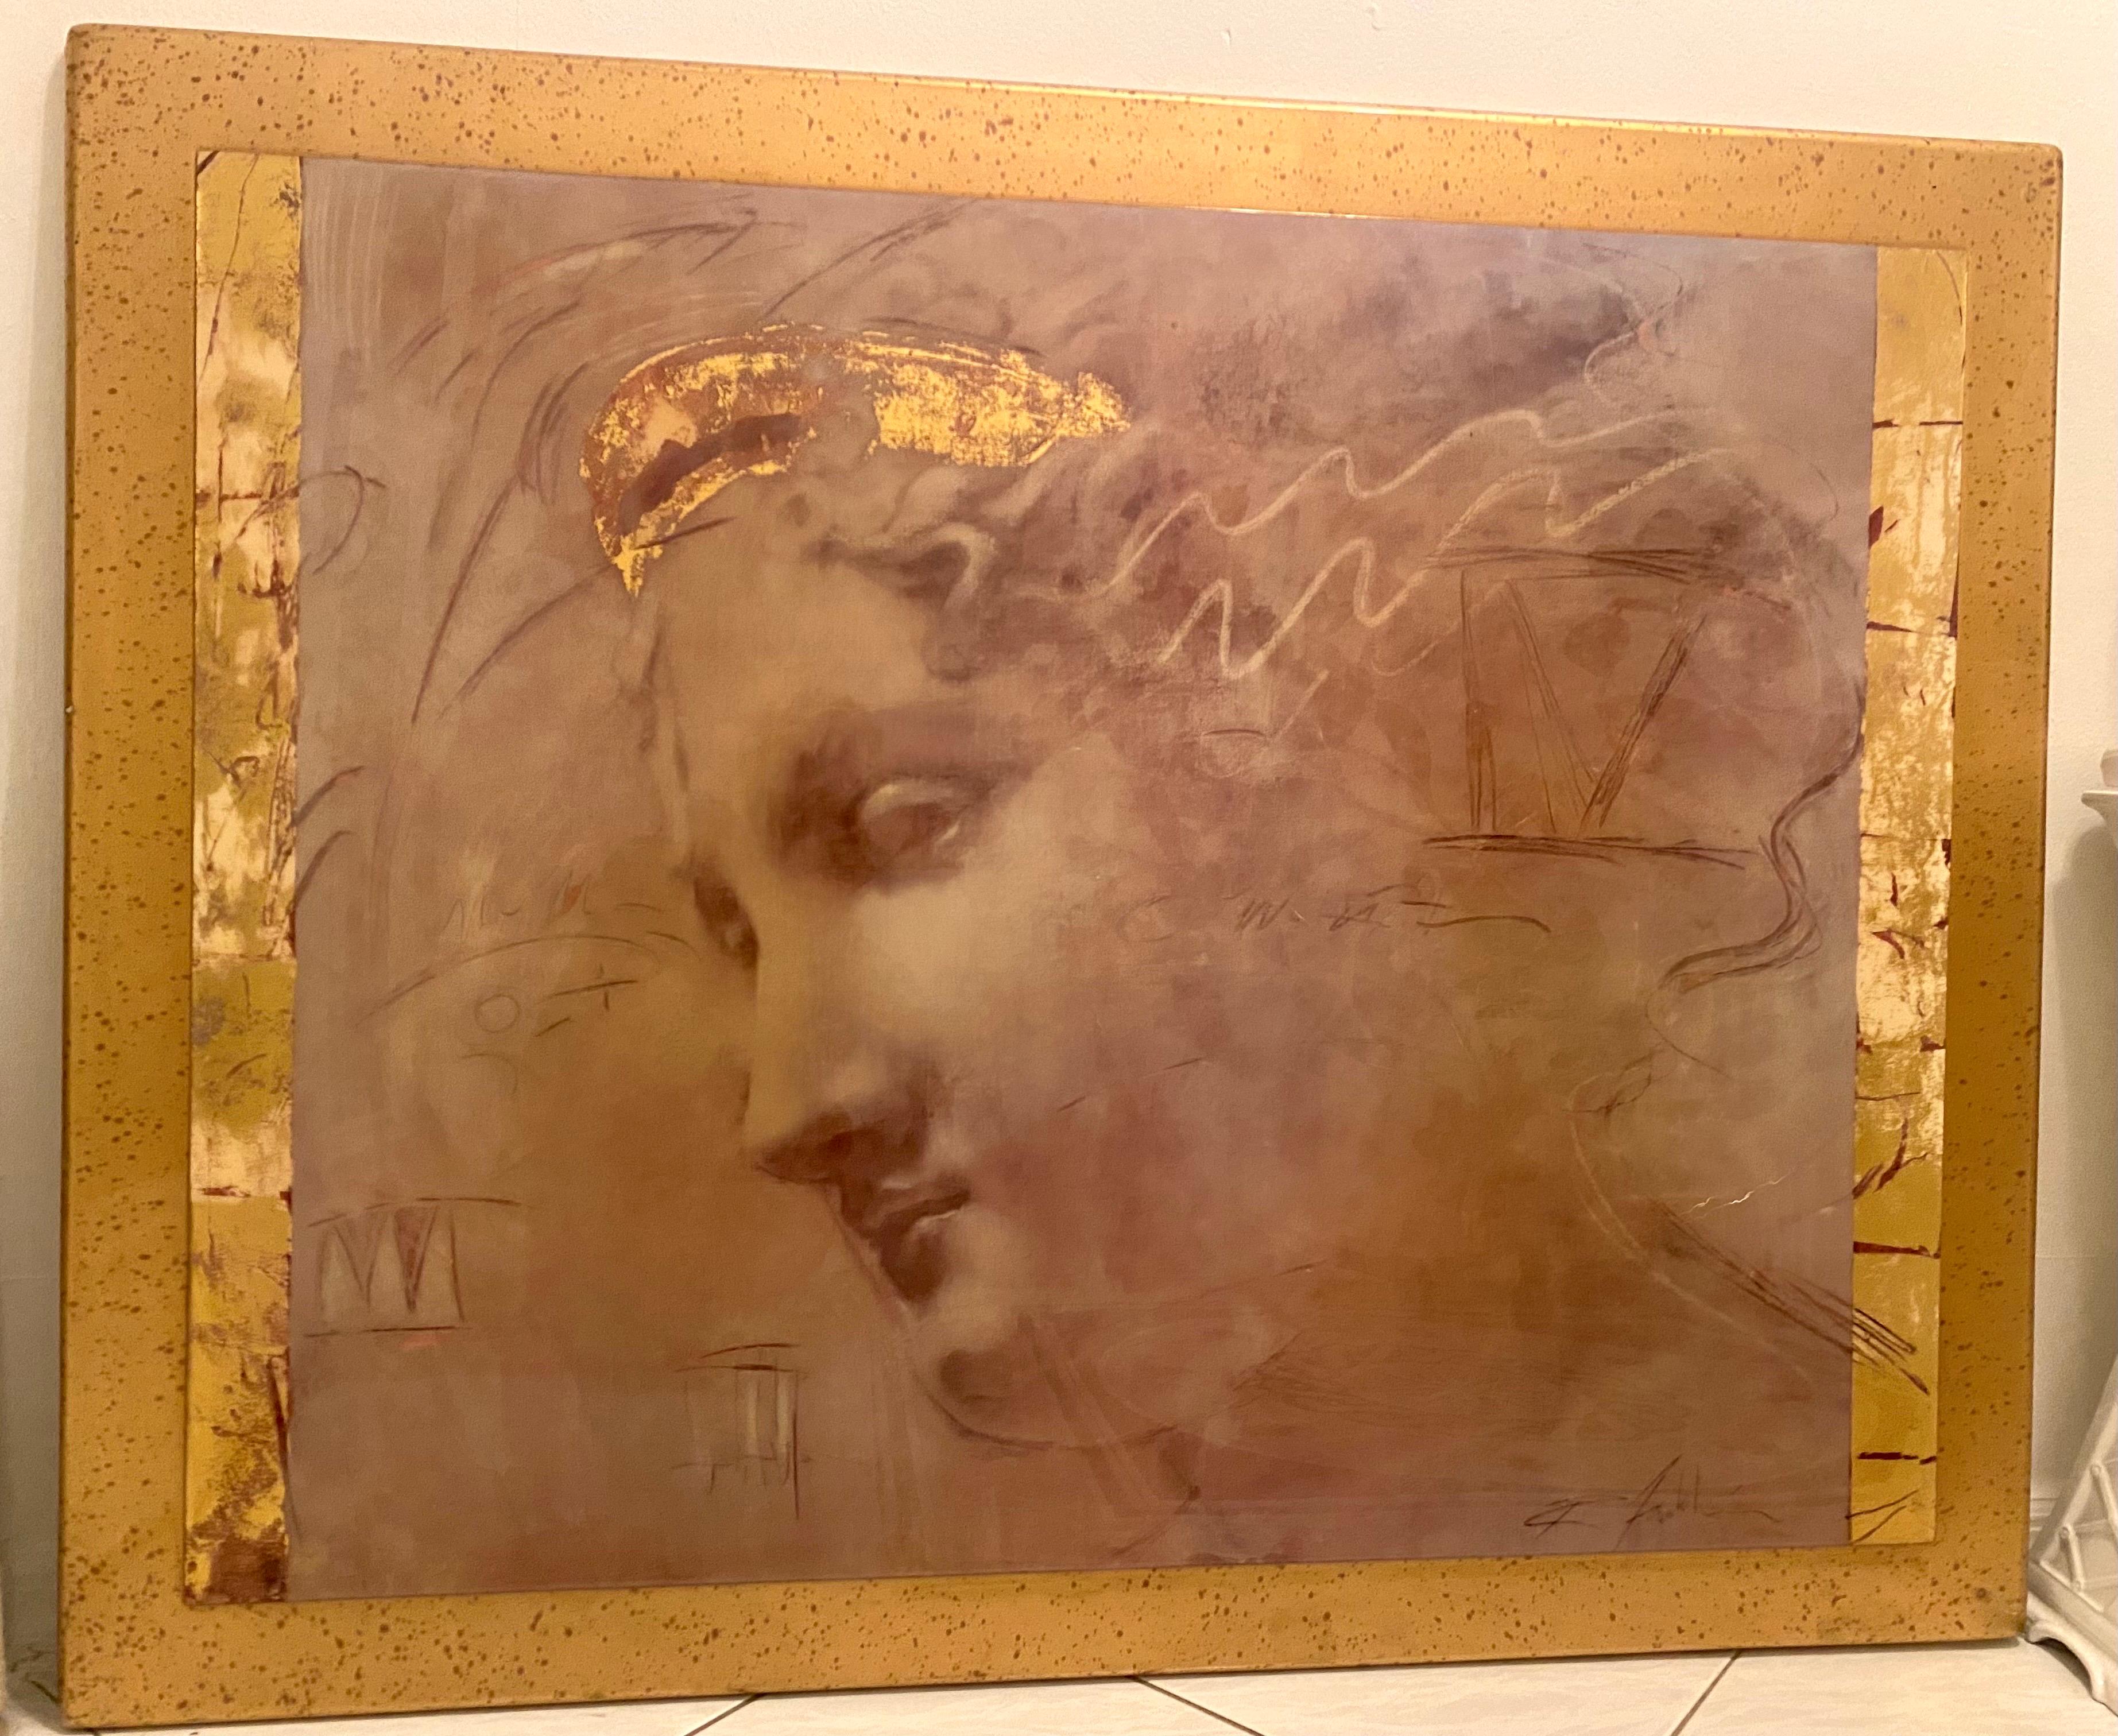 Large and remarkable painting with watercolor, charcoal, pastel crayon and gold leaf techniques. The custom hand made frame is gilt wood with lacquer. The piece is in very good condition and highly decorative and reminiscent of ancient Greece or